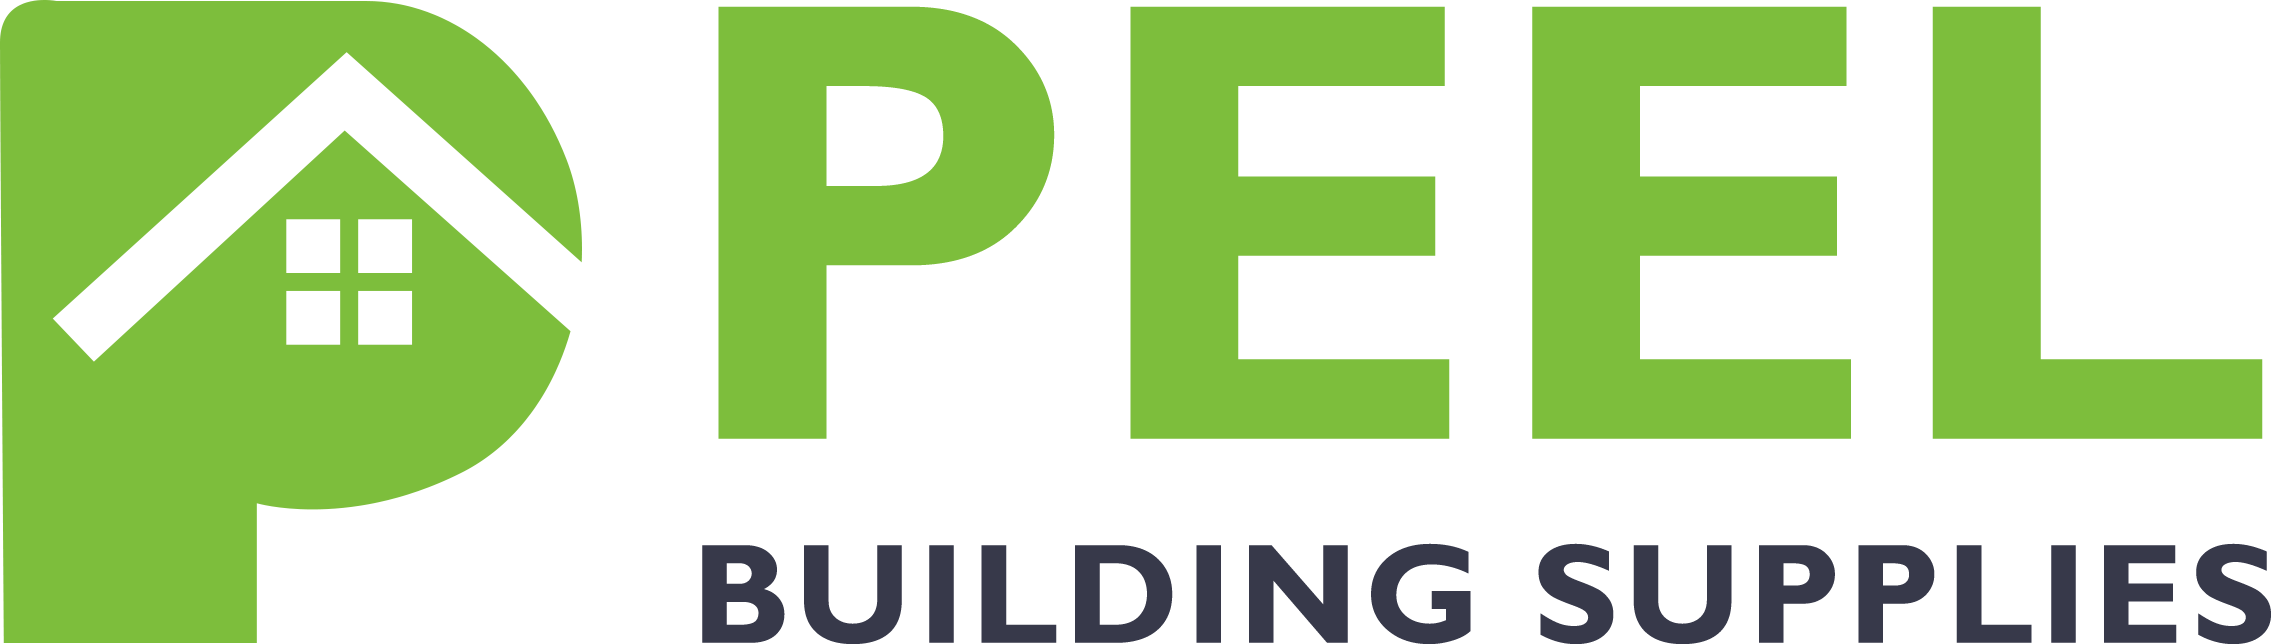 Peel Building Supplies Suggests Insulation Benefits for House Owners